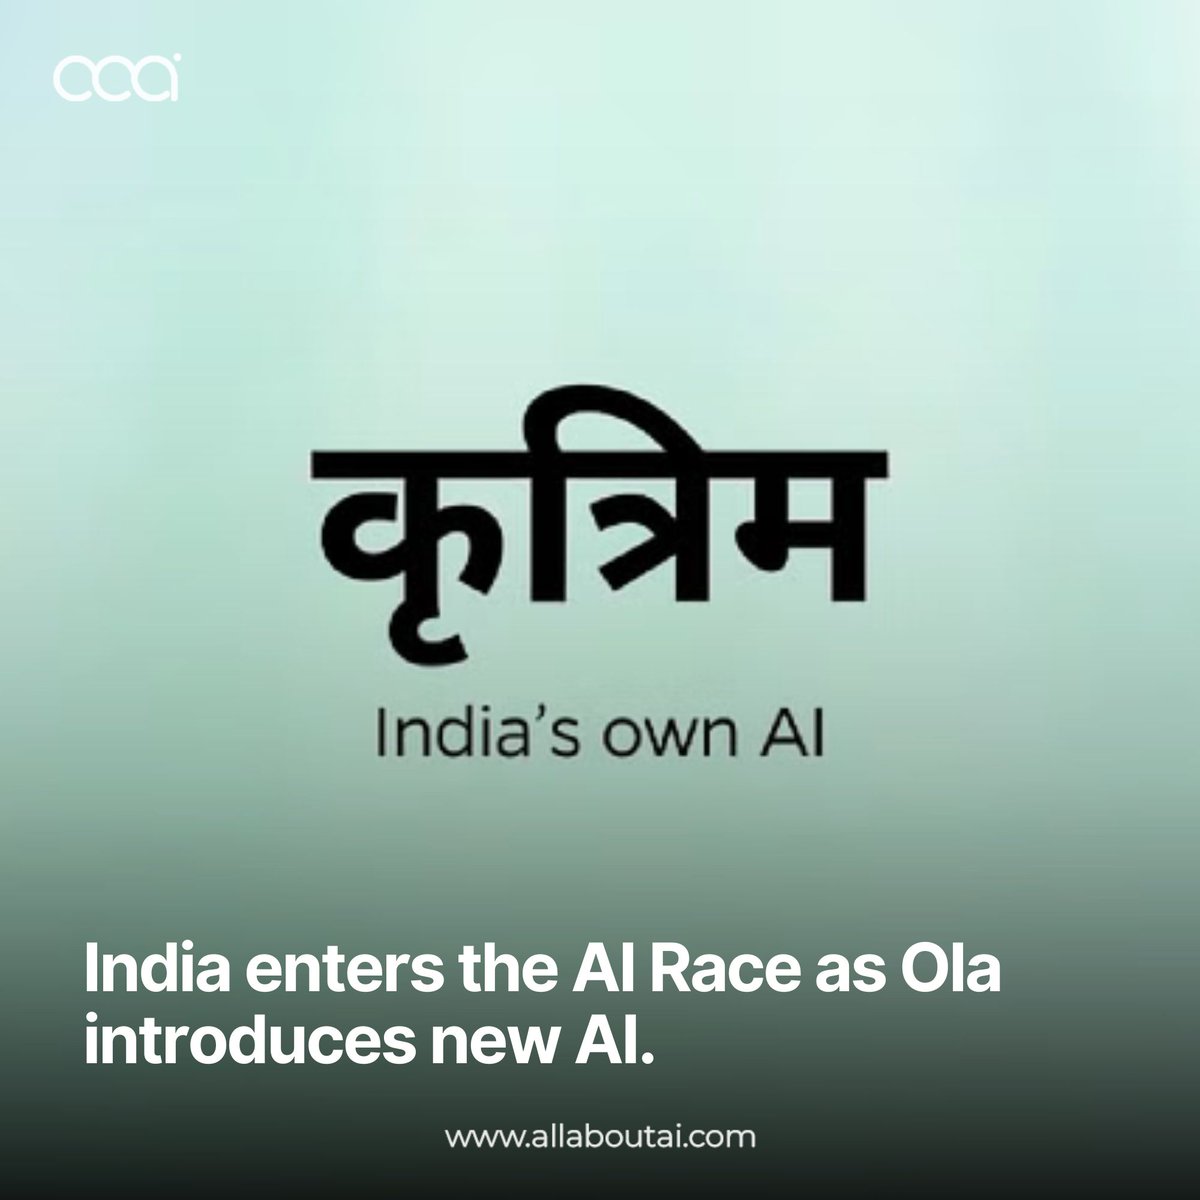 India joins the AI race with a homegrown challenger! Ola's new 'Krutrim' AI app takes on ChatGPT and Gemini, bringing advanced language capabilities to the Android platform. Can this desi contender shake up the AI game? 
Full blog at our website!
-
#AllAboutAI #AI #KrutrimAI